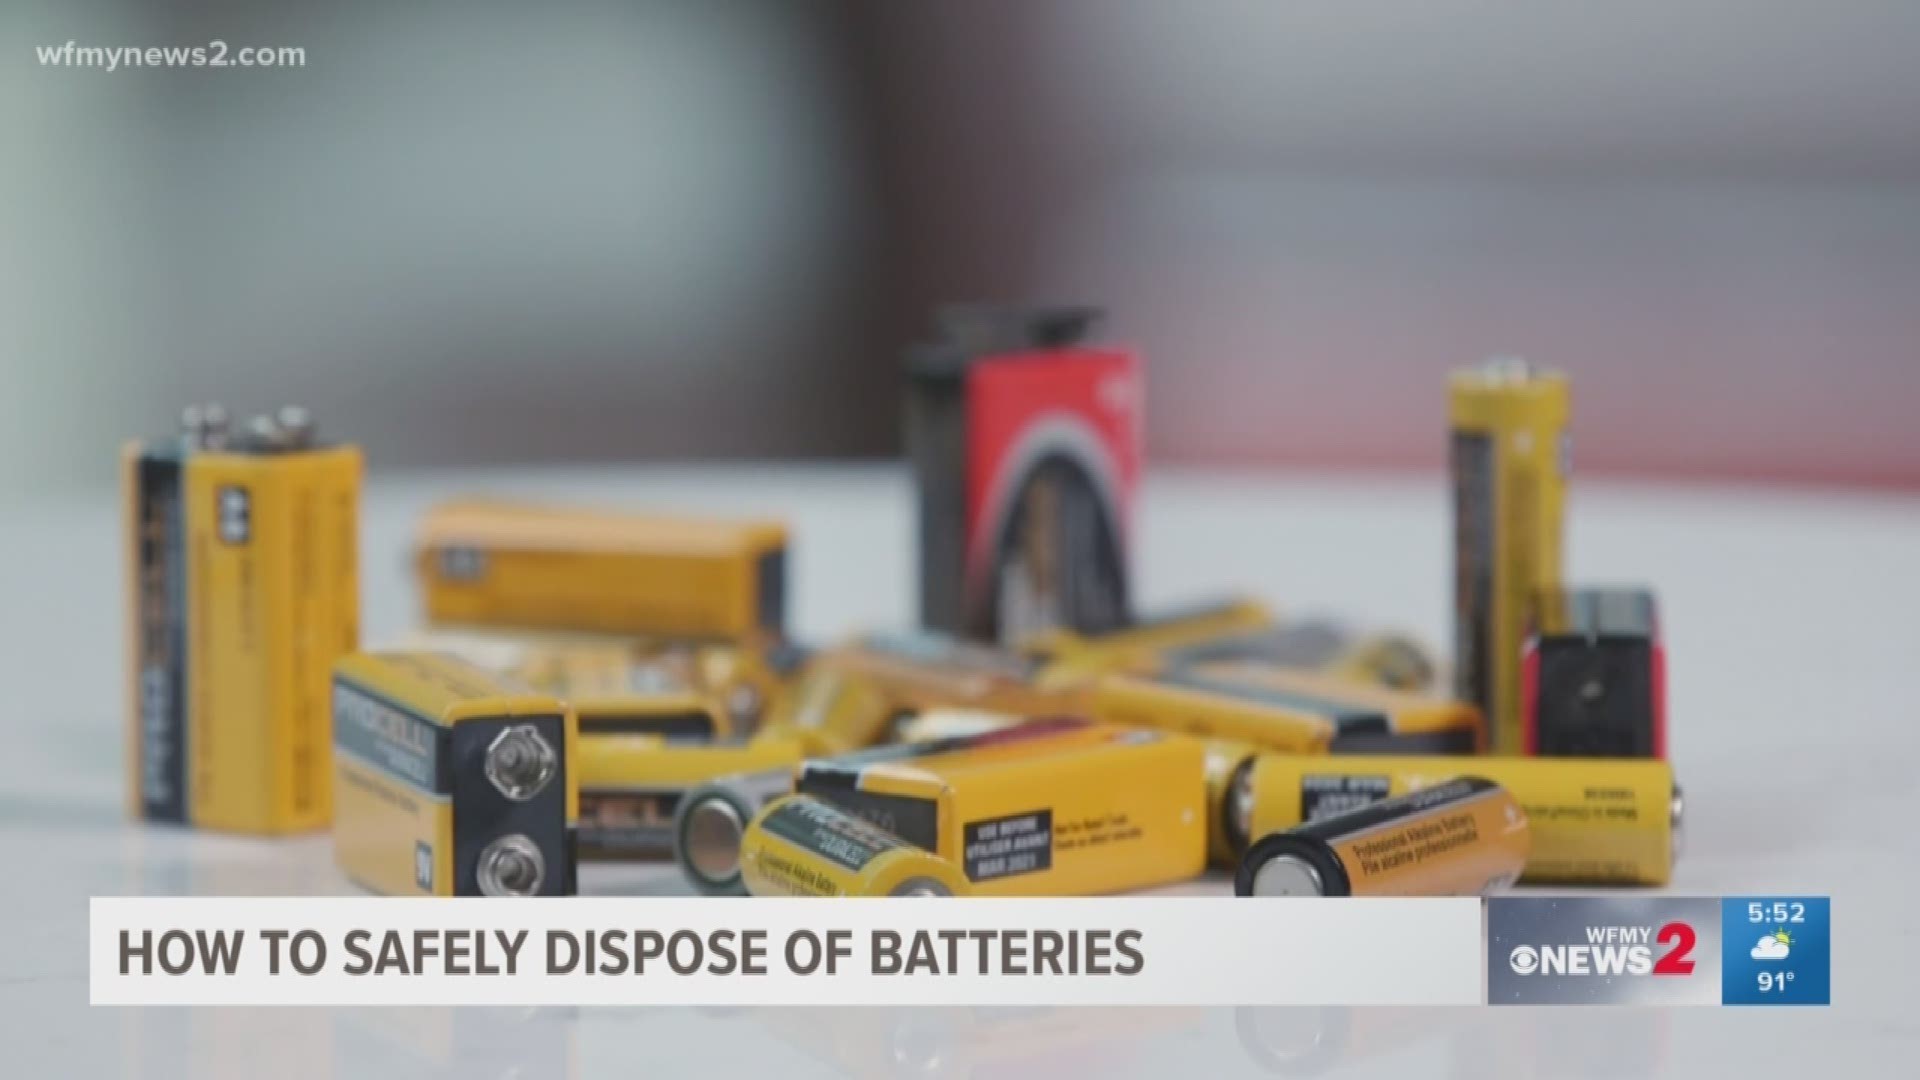 Those batteries can start a fire if they're not properly stored.